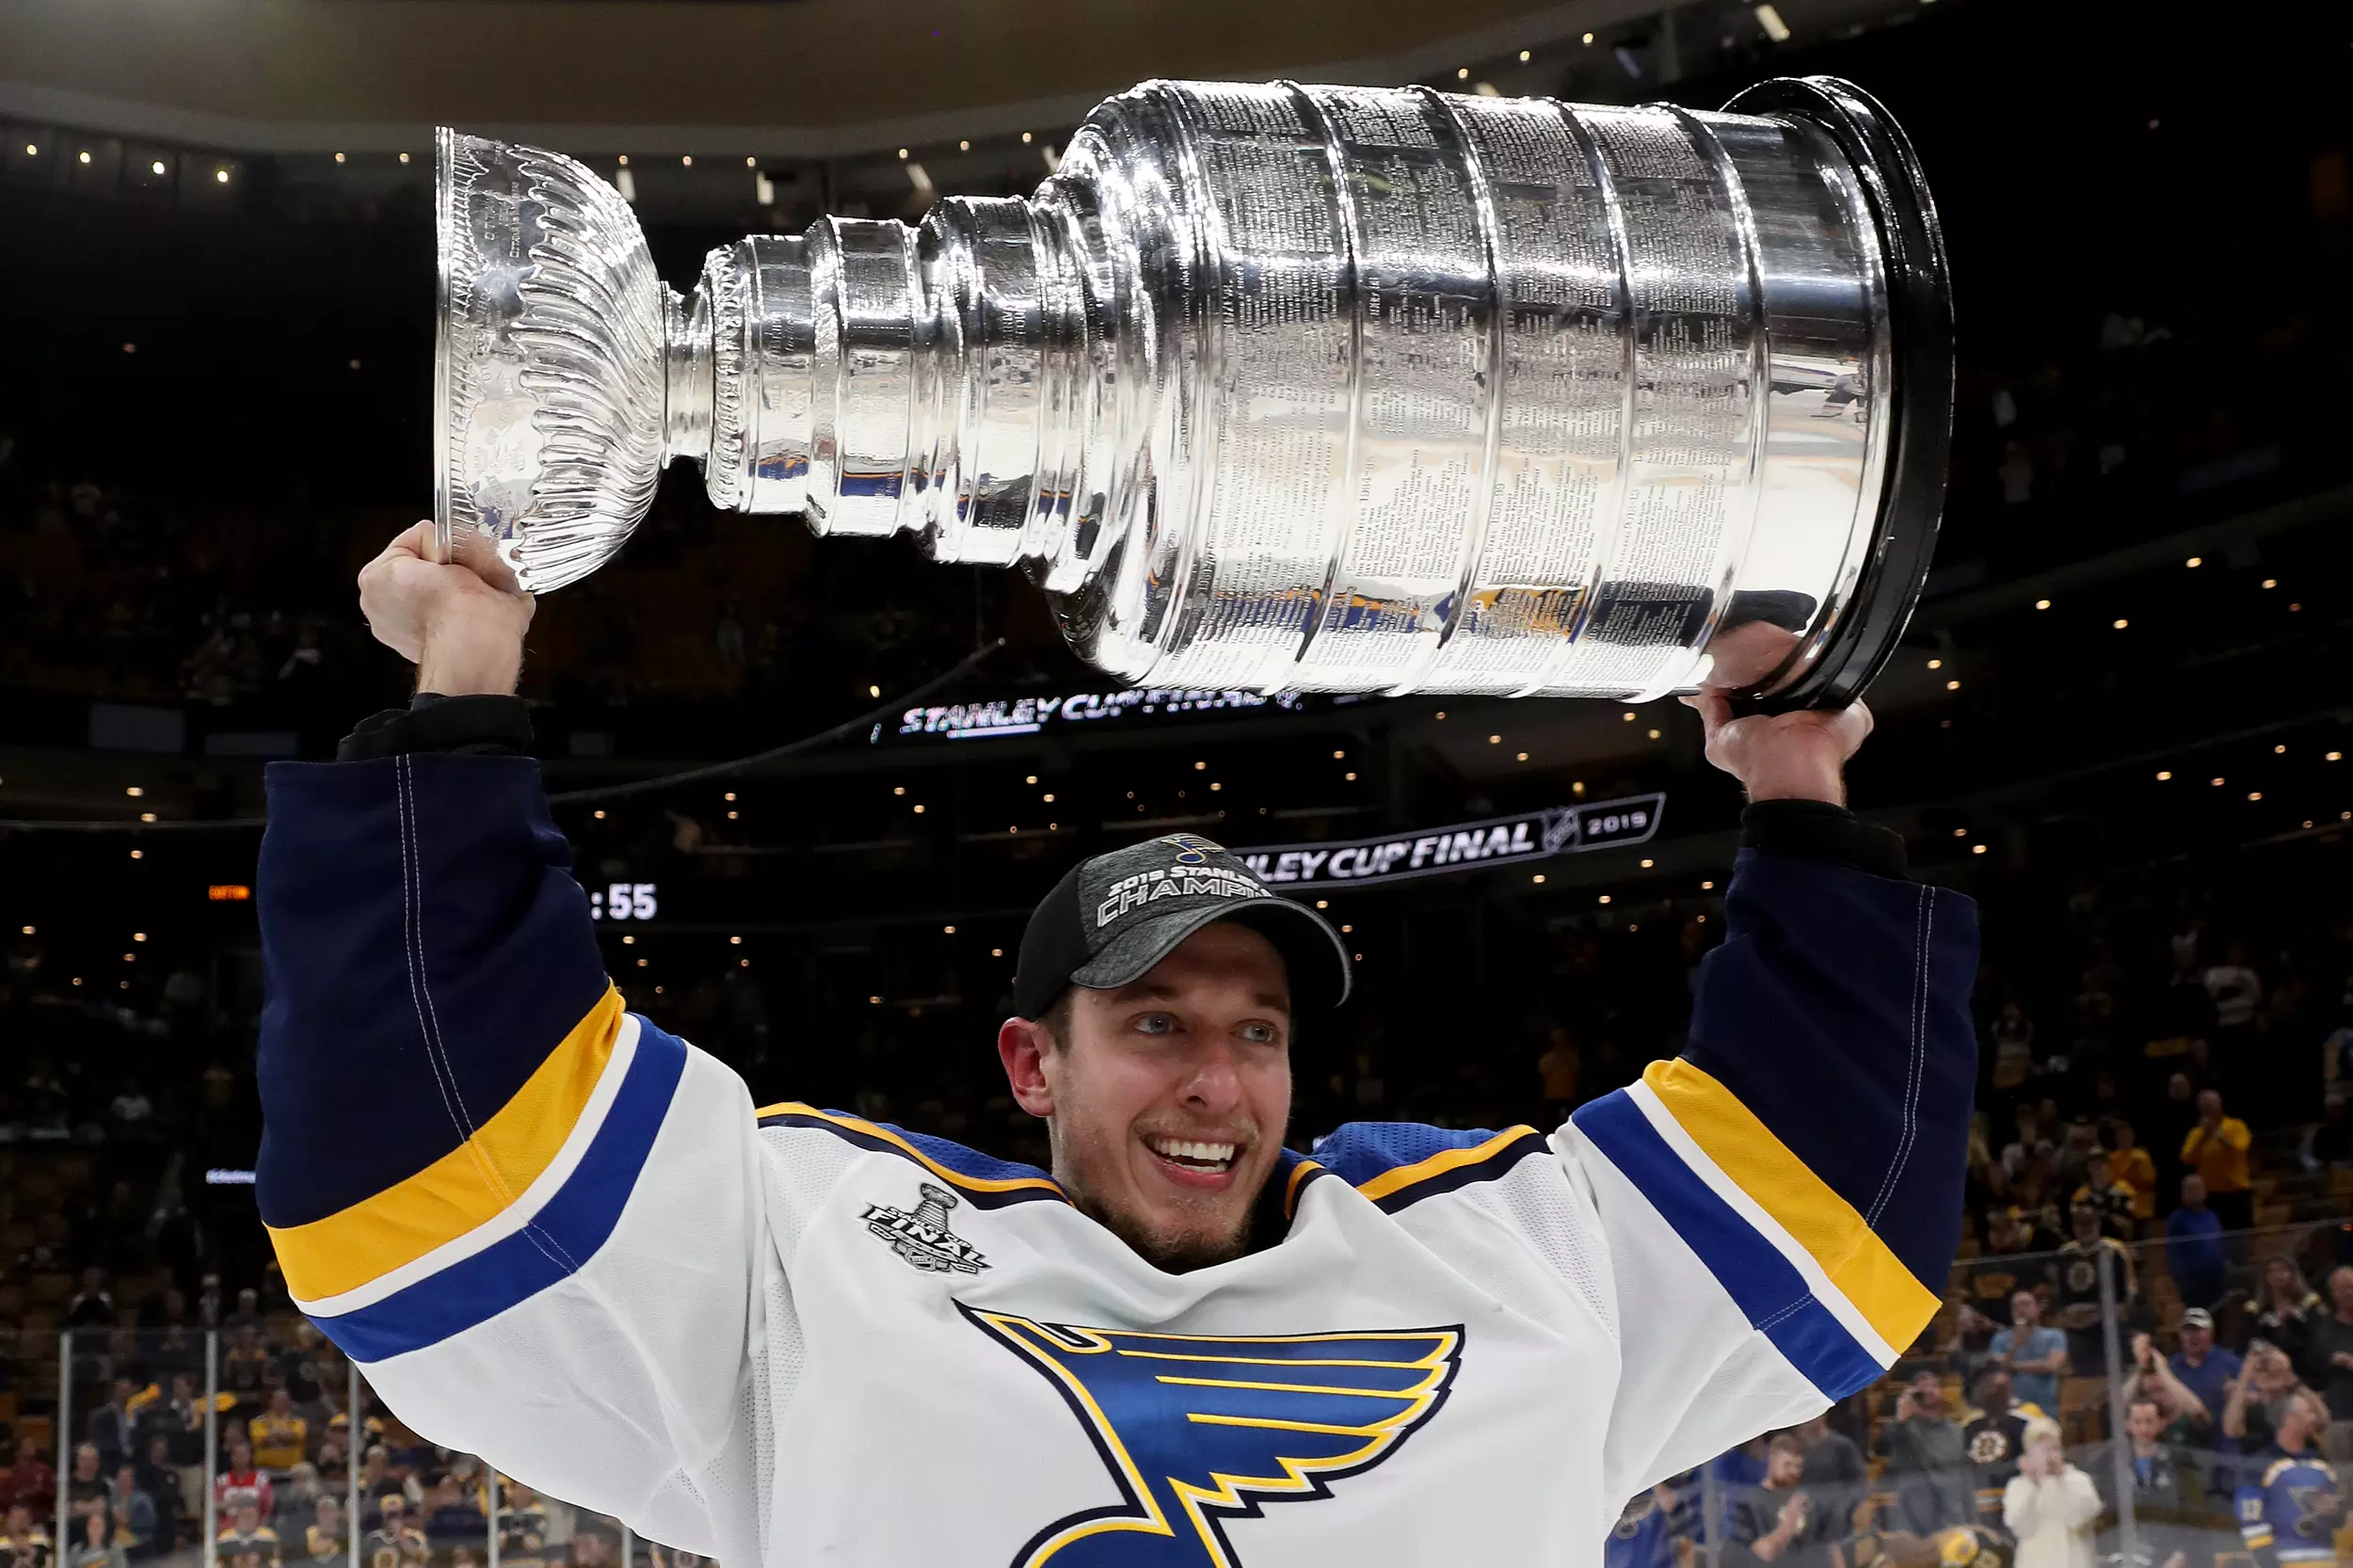 Second Year In A Row, A Former K-Wing Hoists The Stanley Cup